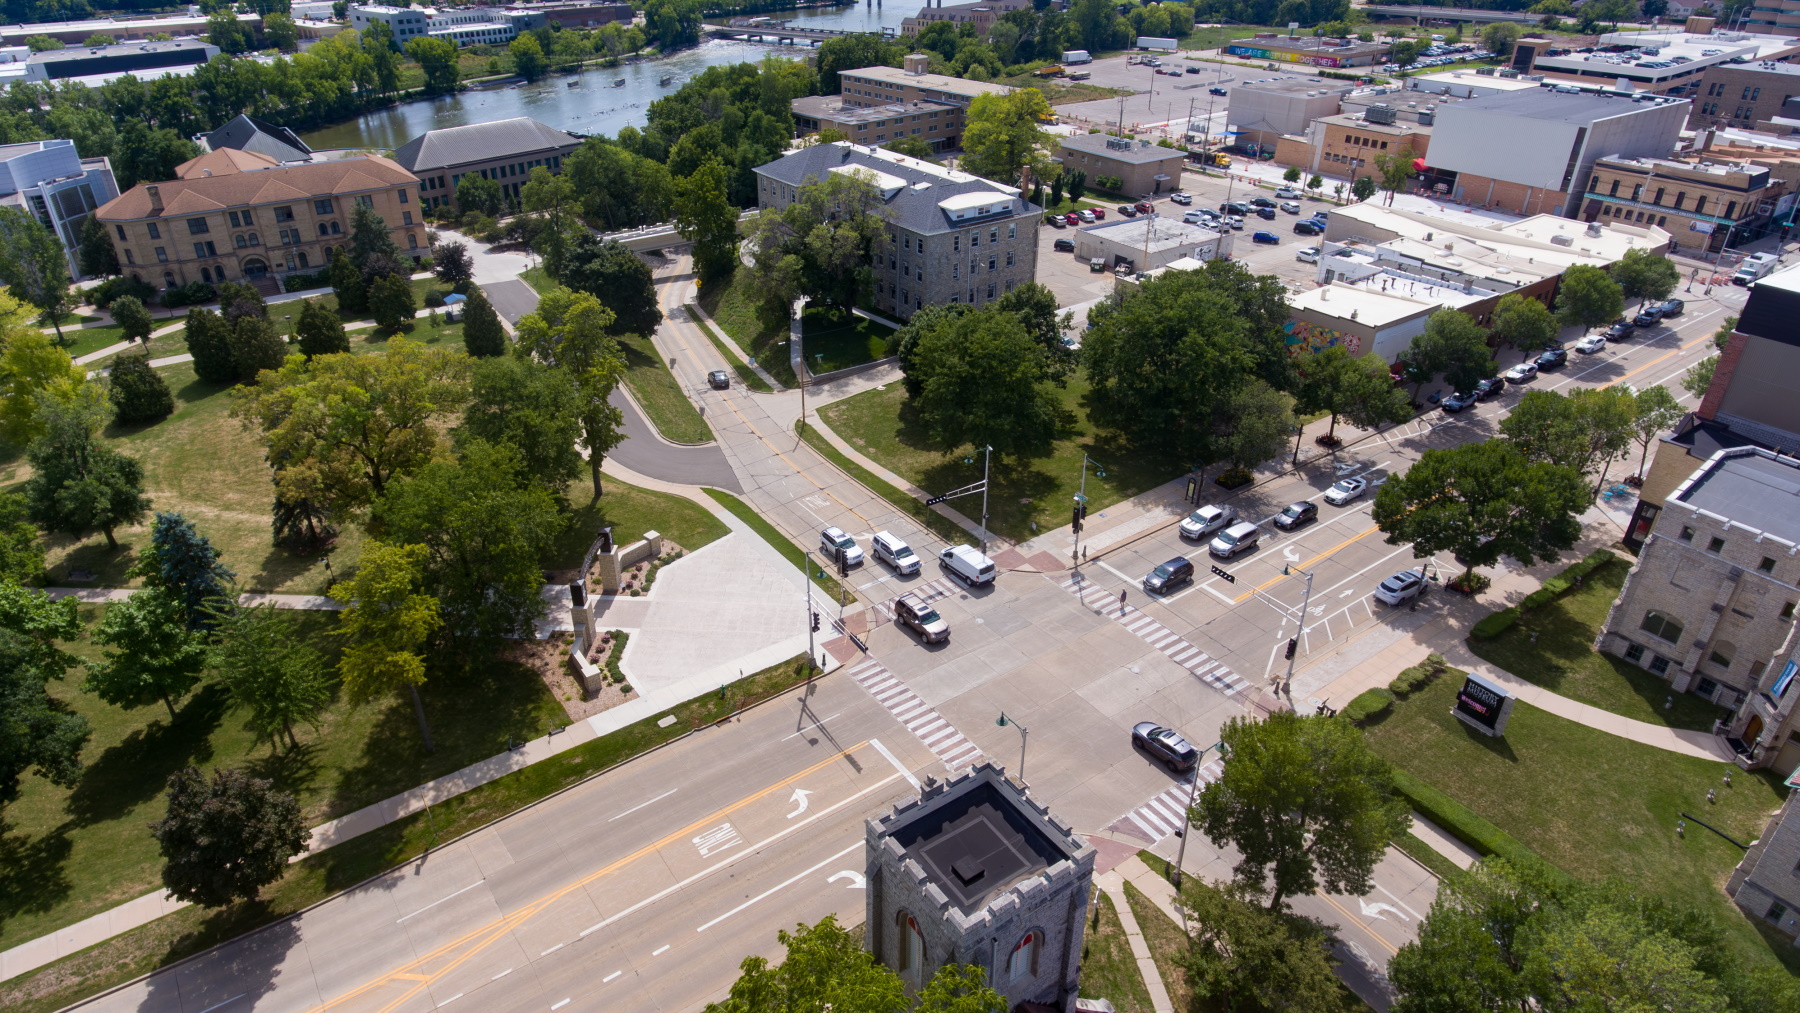 An aerial view of the intersection of College Avenue and Drew Street in Appleton.